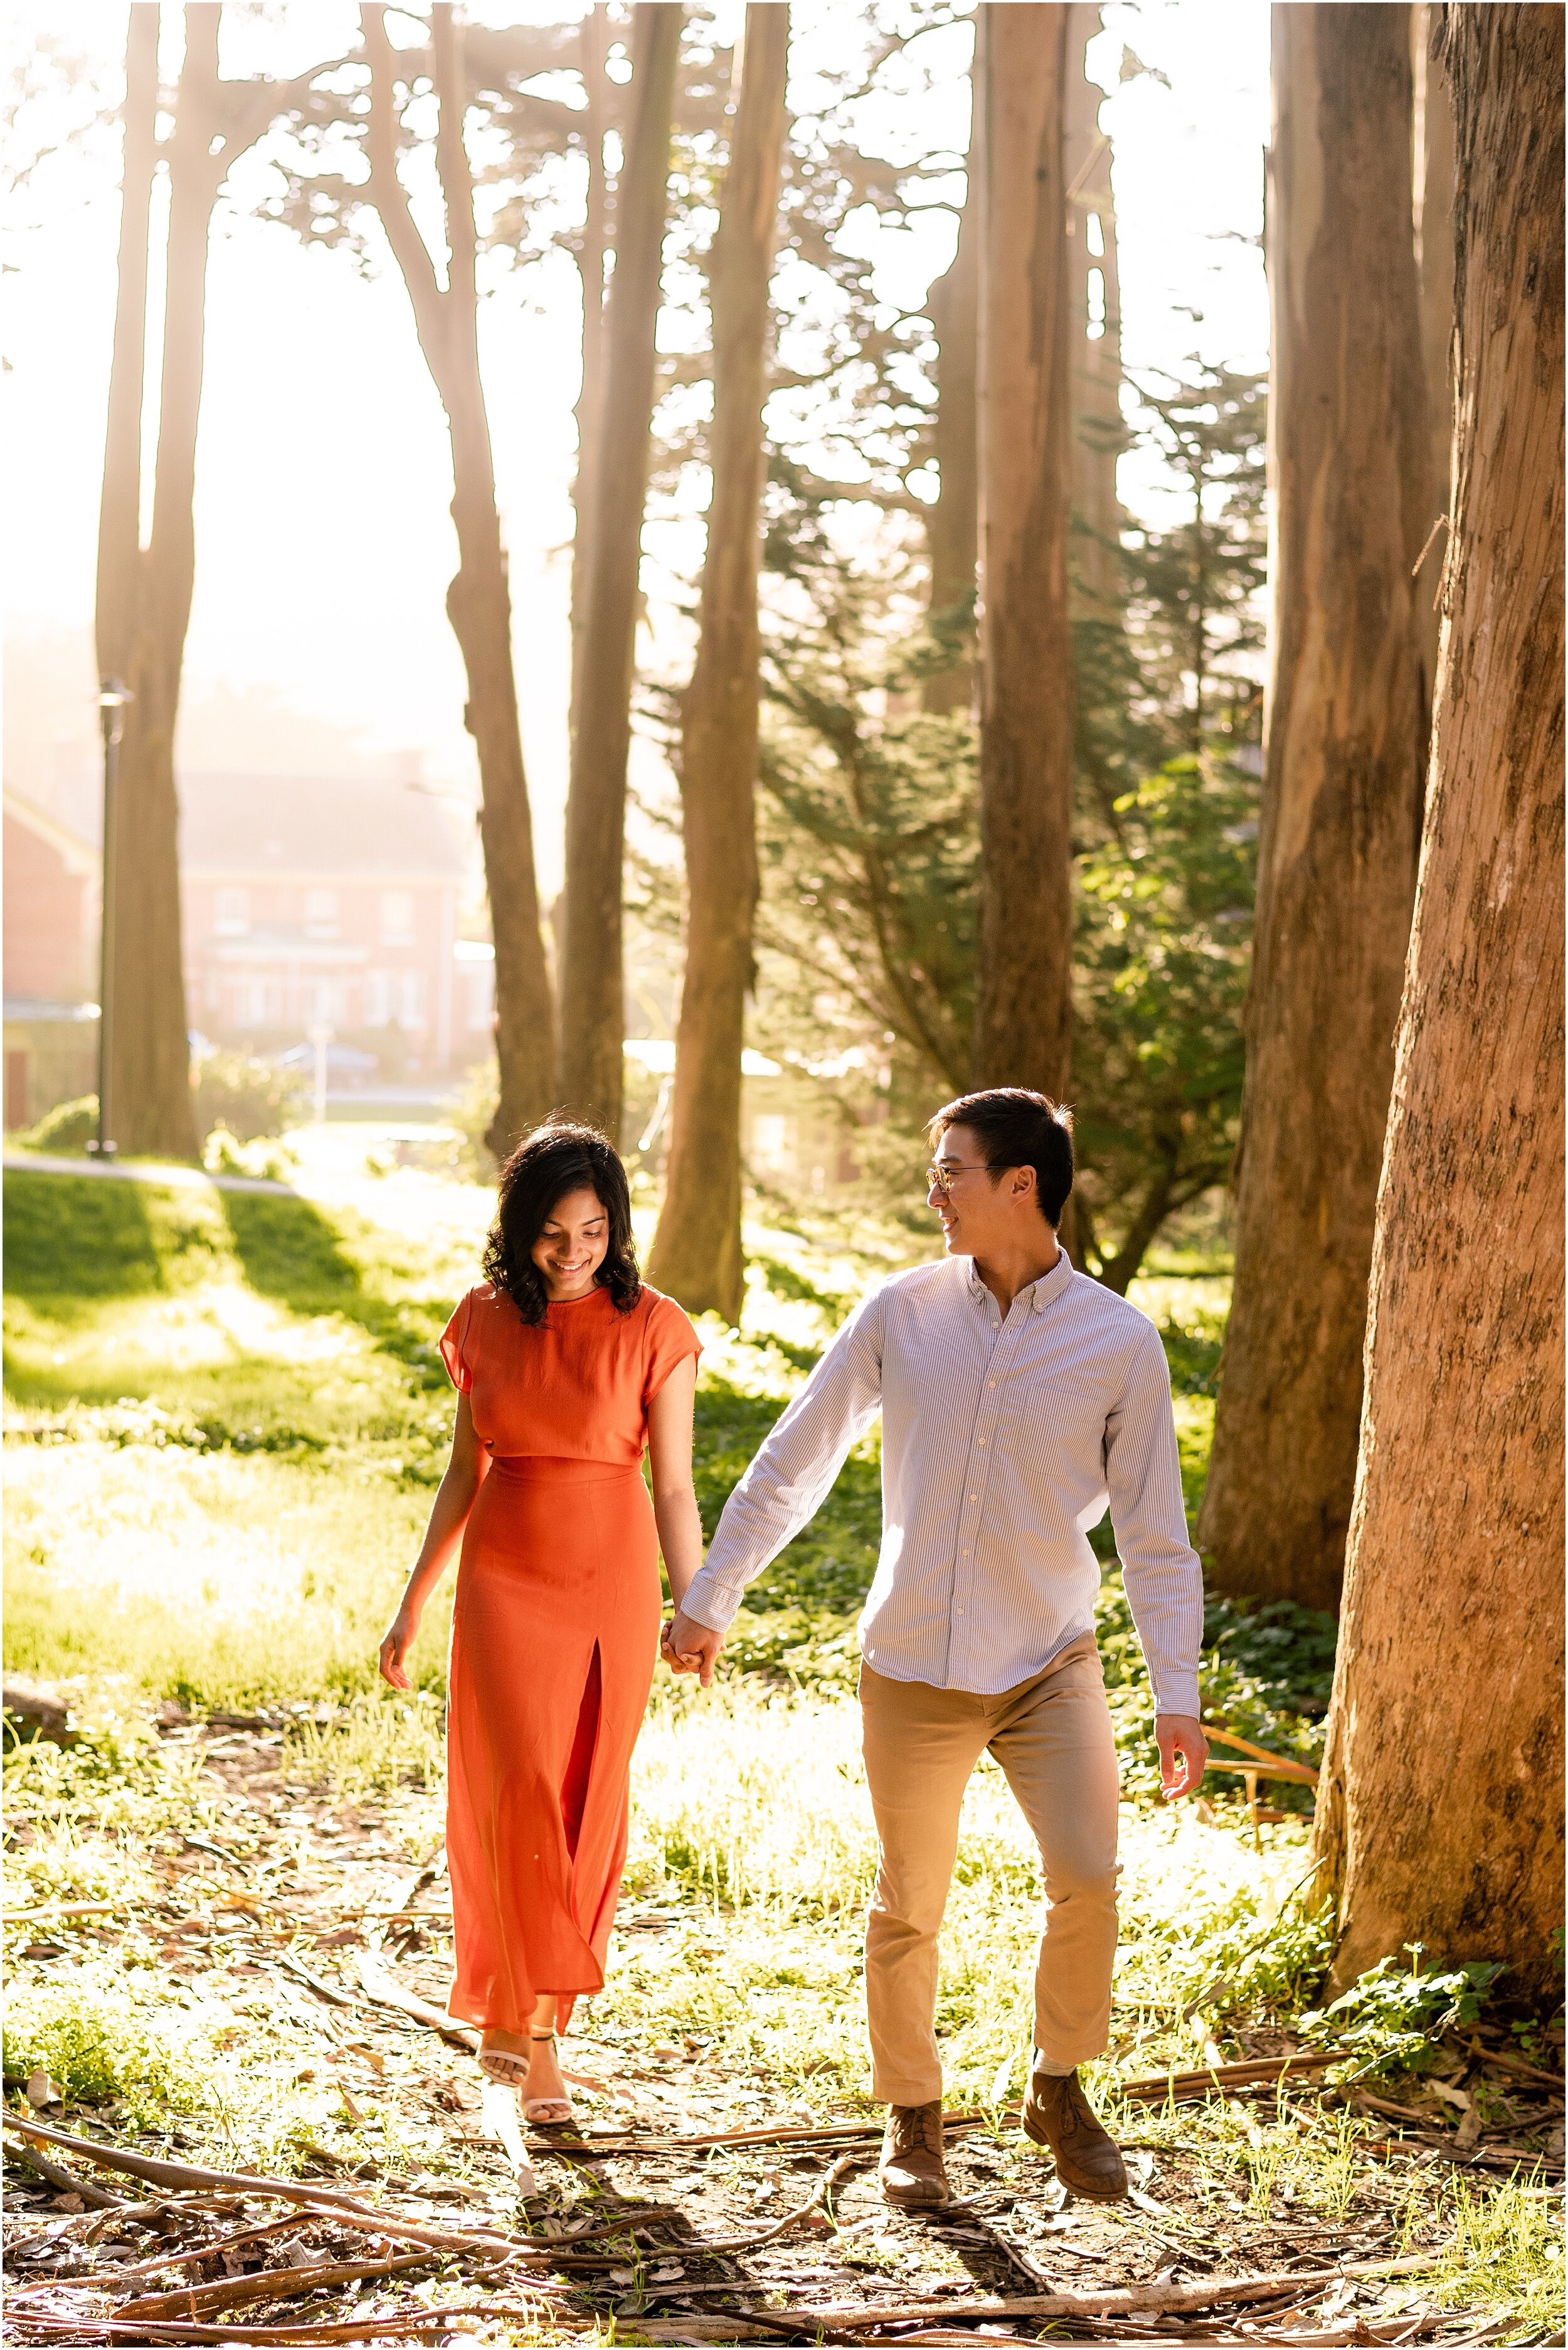 hannah leigh photography palace of fine arts engagement session san francisco CA_5594.jpg